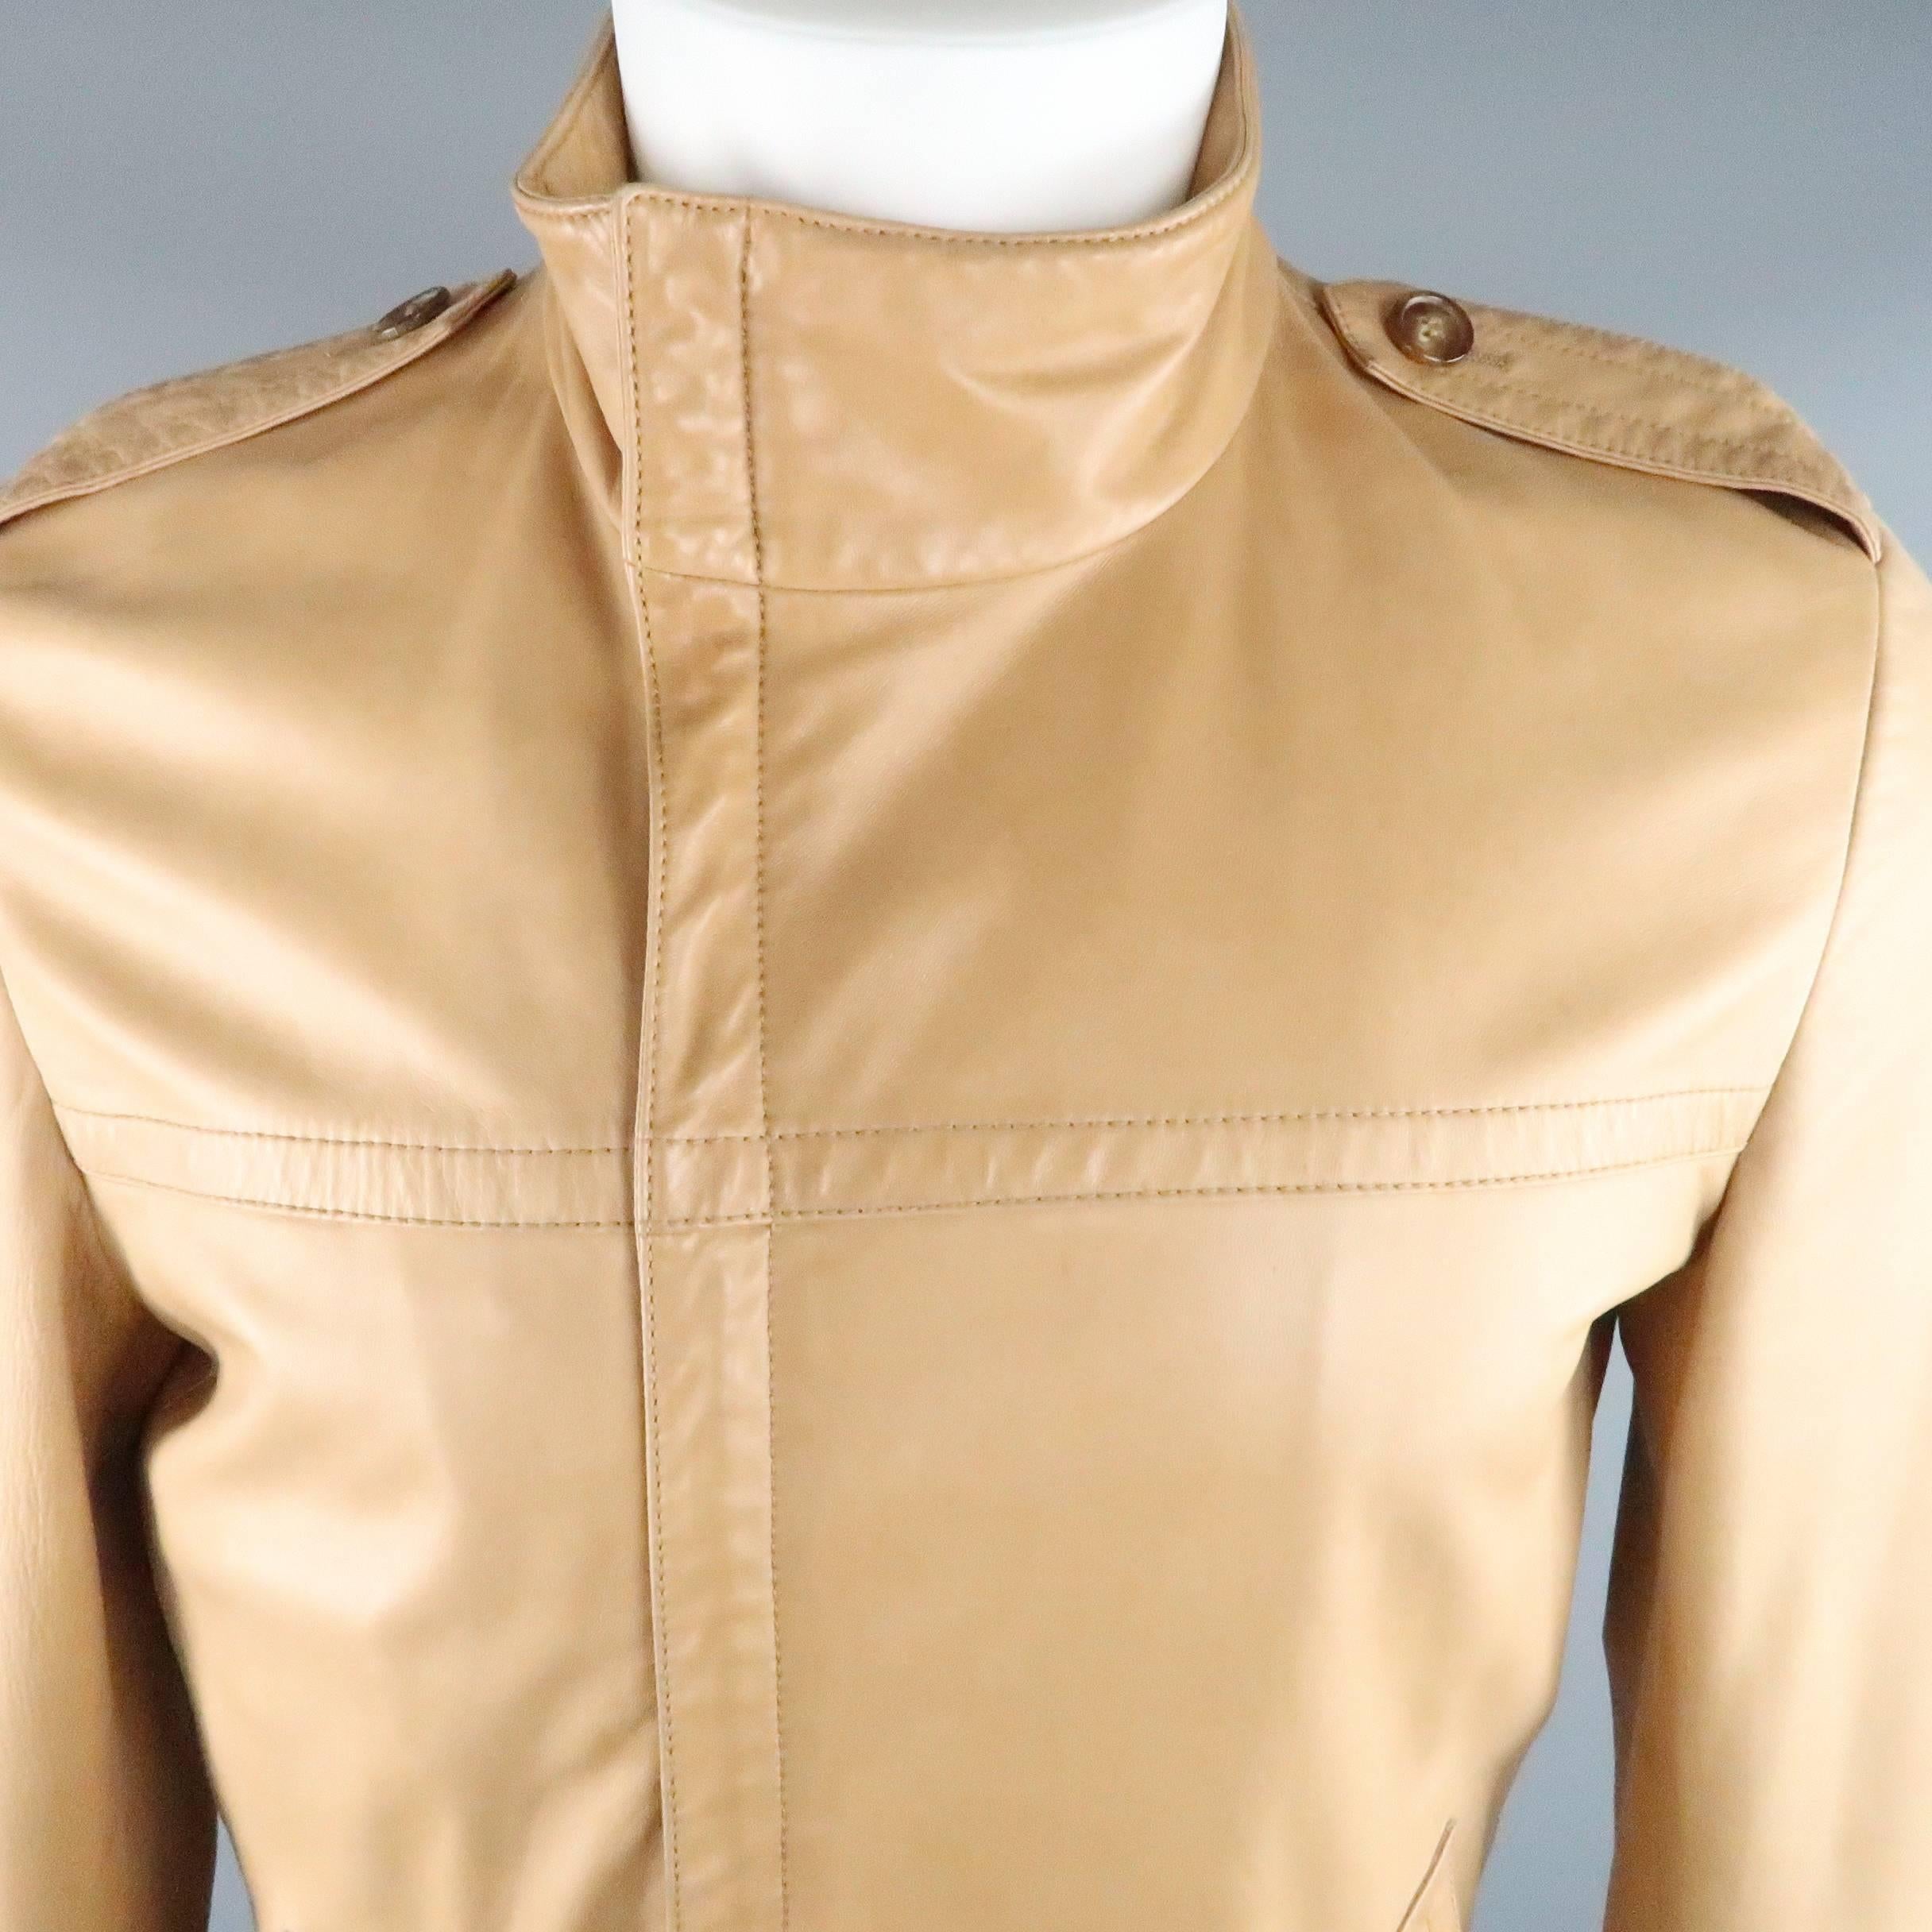 Orange Men's GUCCI by TOM FORD 38 Light Tan Leather Motorcycle Jacket 2000